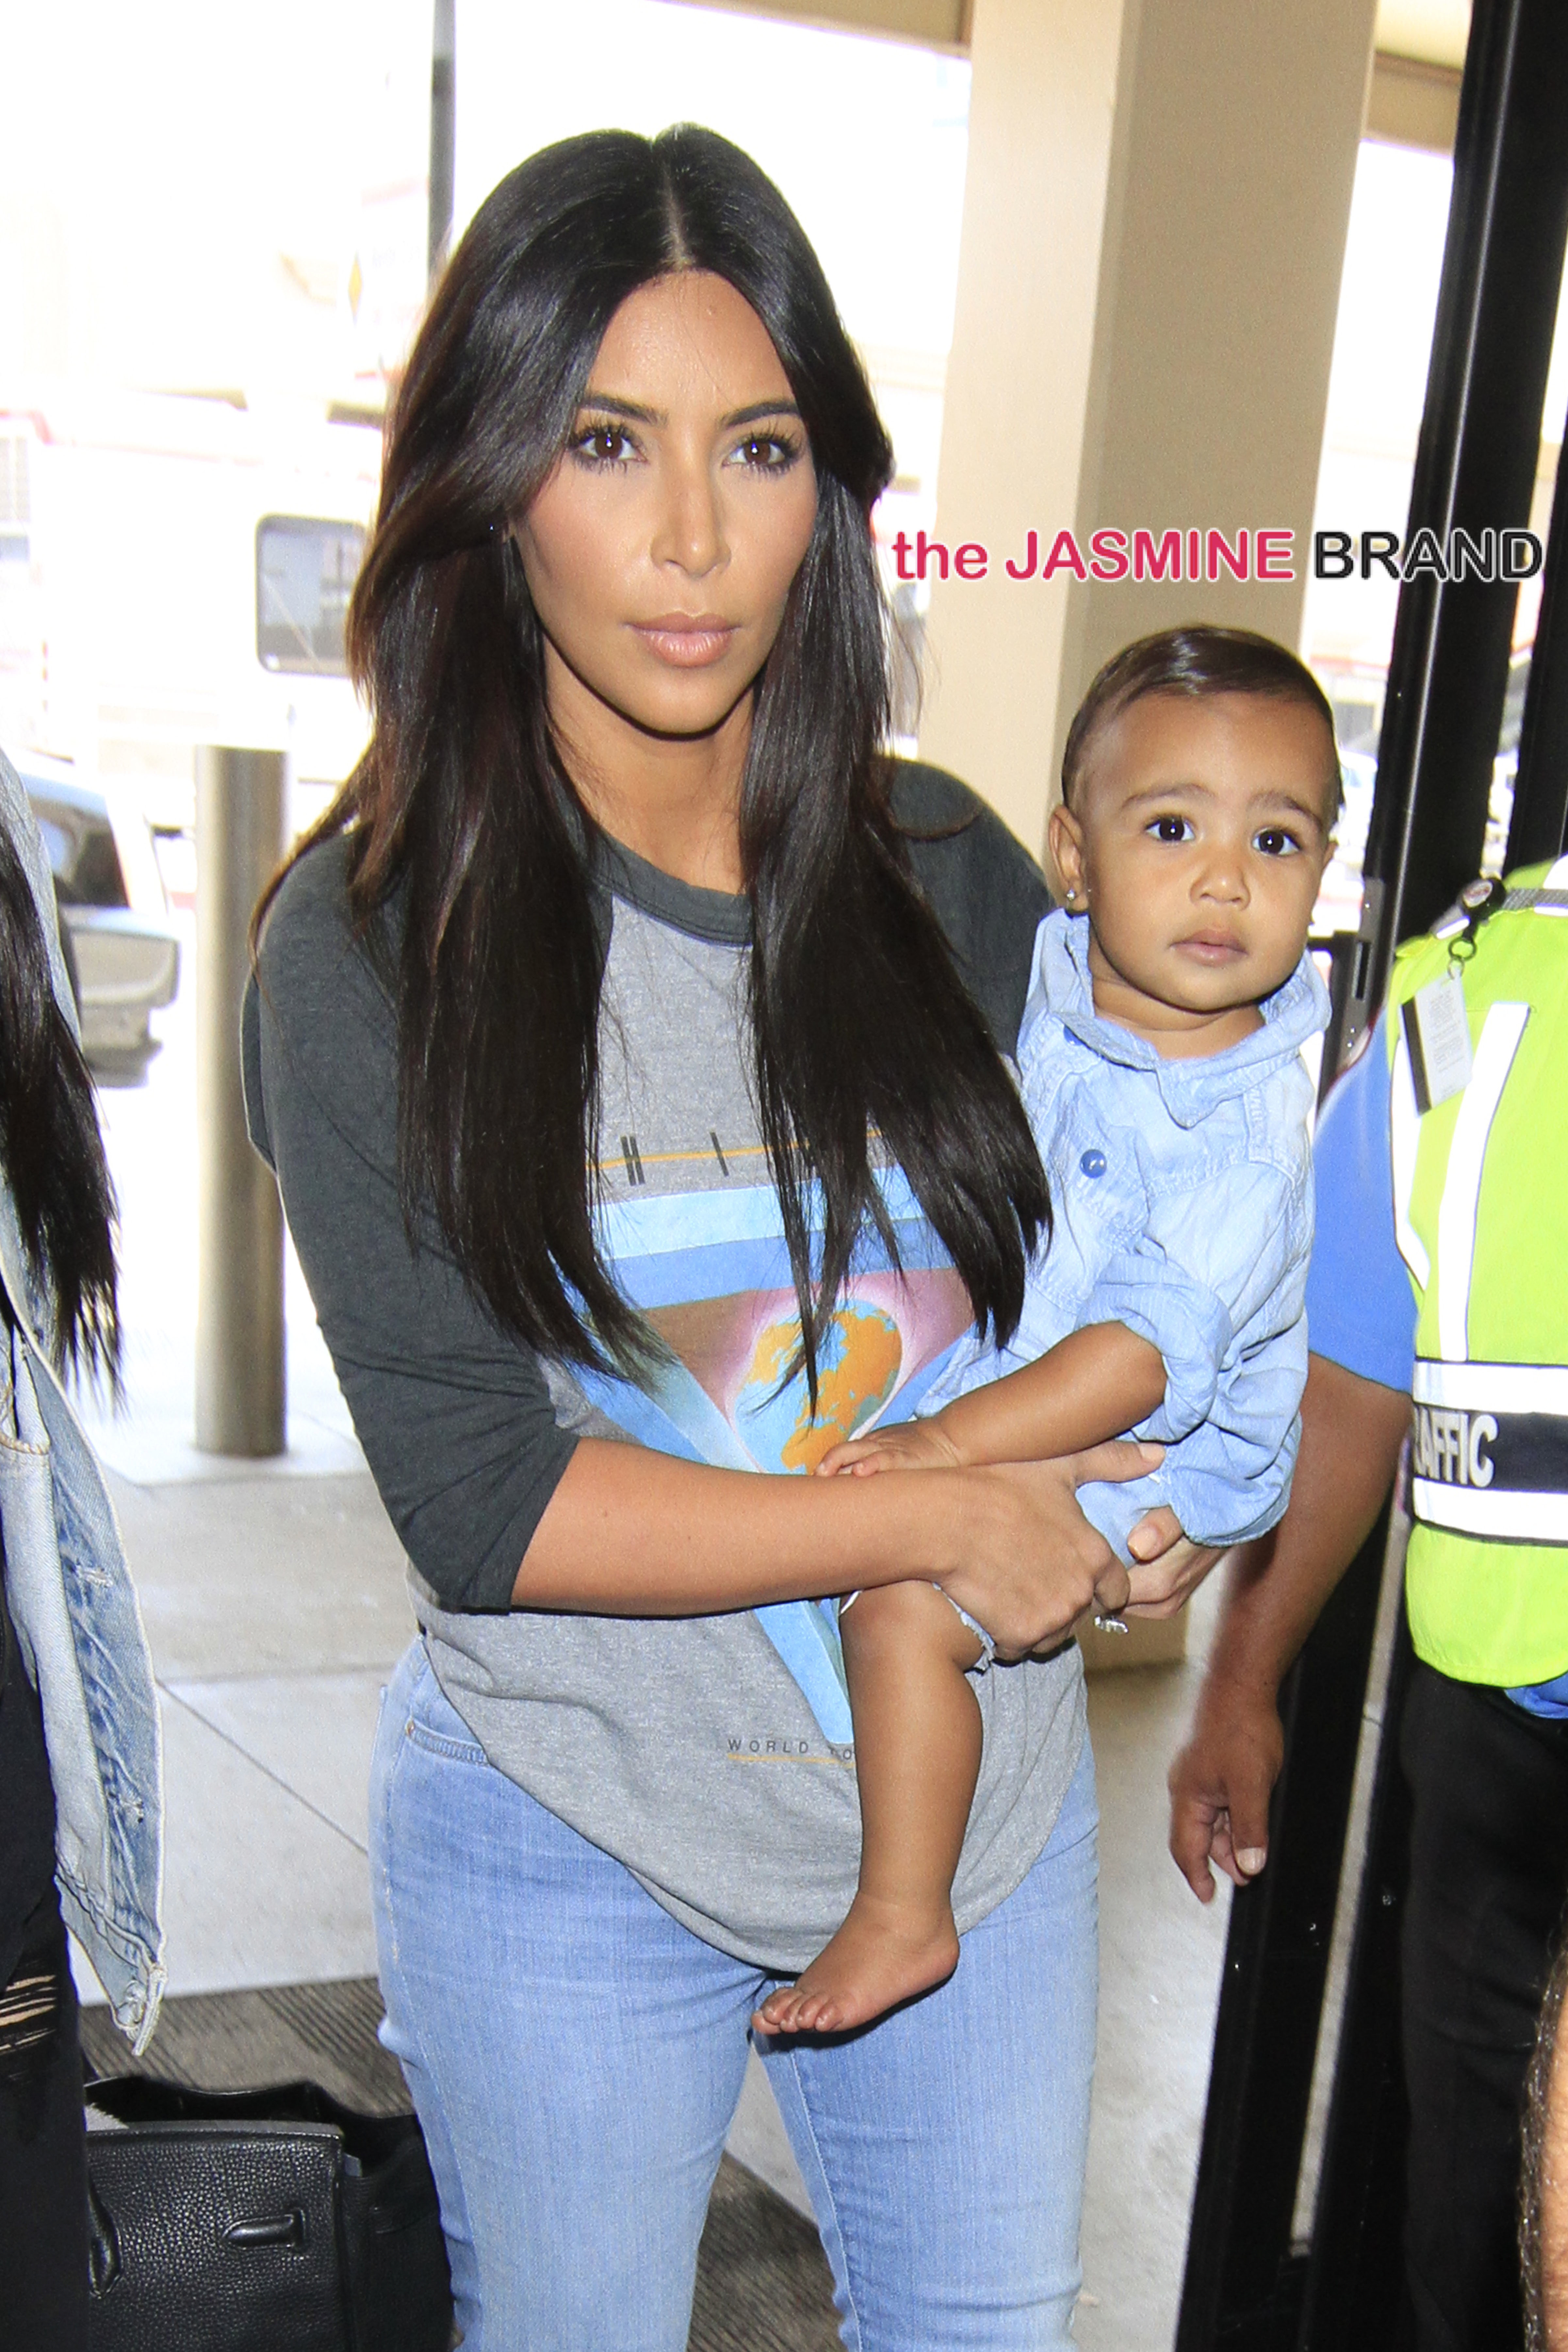 Kim Kardashian kisses her cute 14-month-old daughter, North West as they make their way through Burbank Airport.  The "Keeping up with the Kardashians" star was seen wearing heels and tight jeans showing off her famous butt.